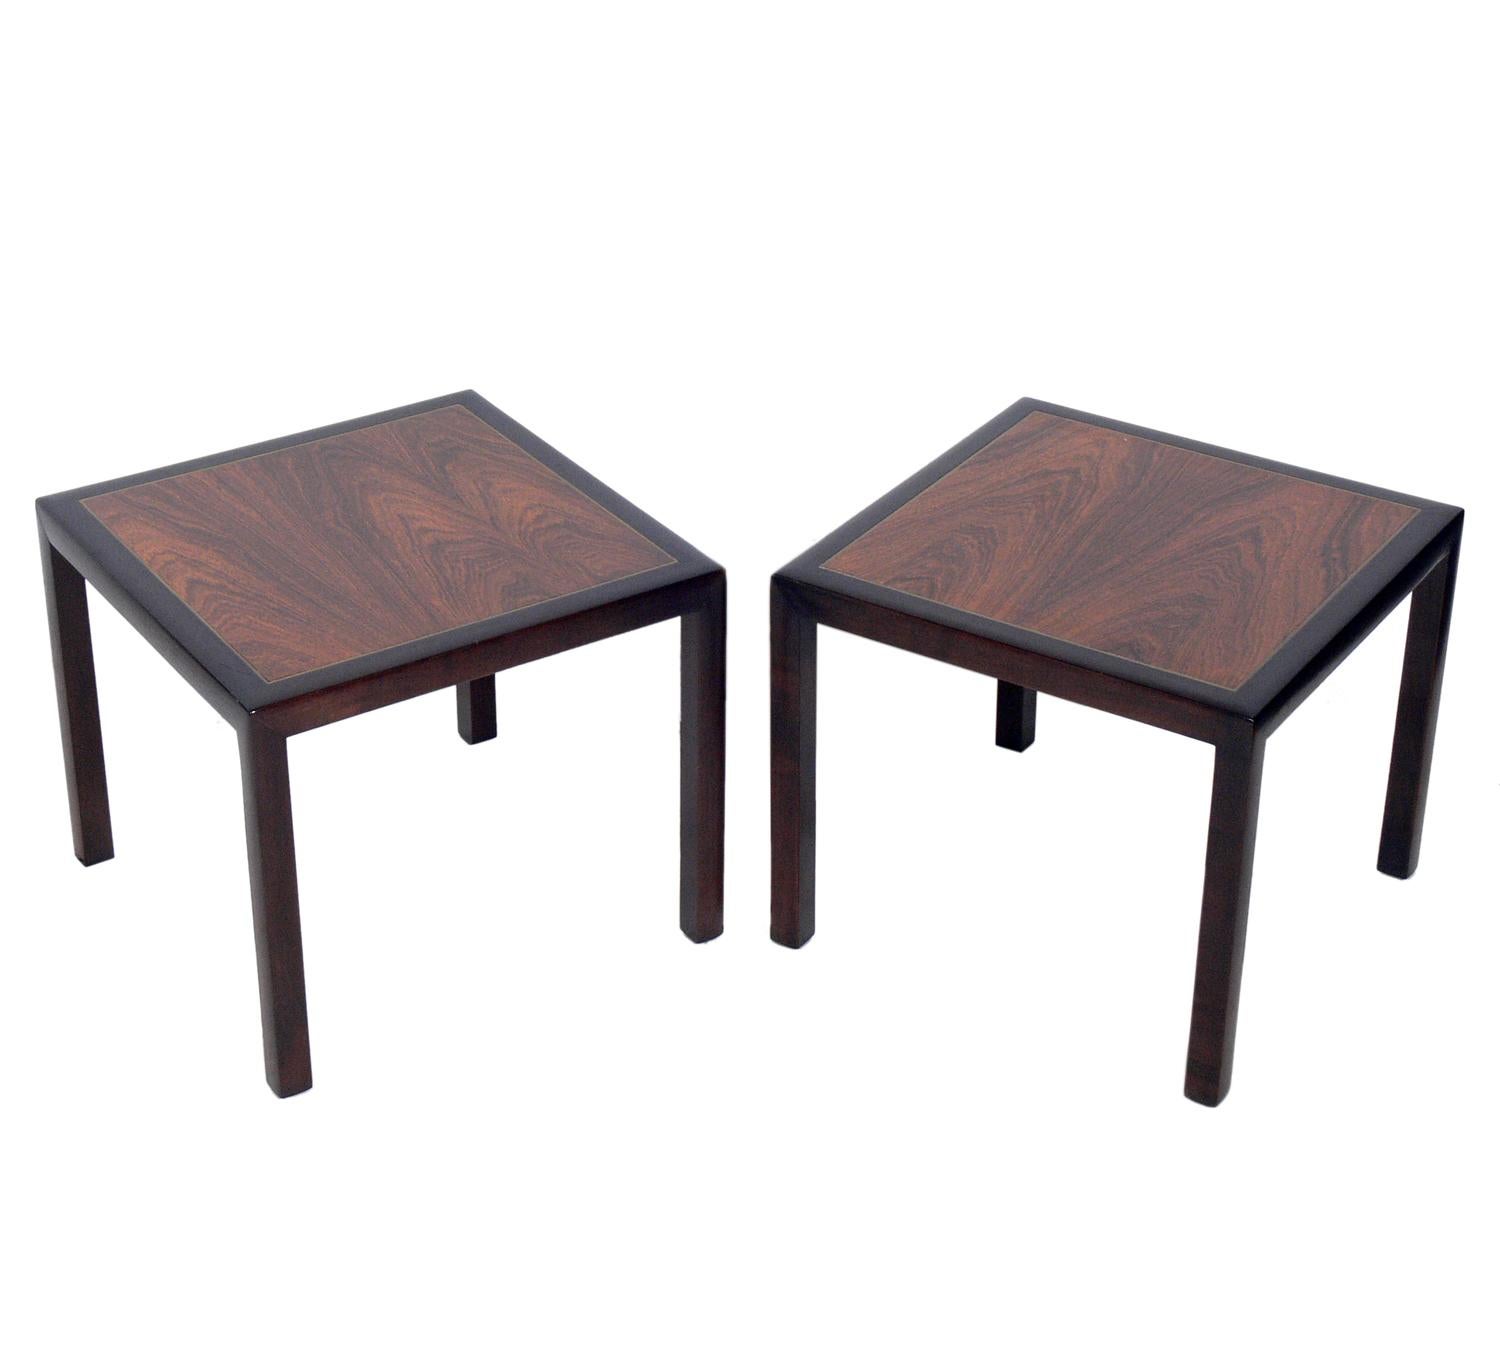 Rosewood and mahogany with brass inlay end tables, attributed to Dunbar, unsigned, American, circa 1950s. They are a versatile size and can be used as end or side tables, or as night stands.